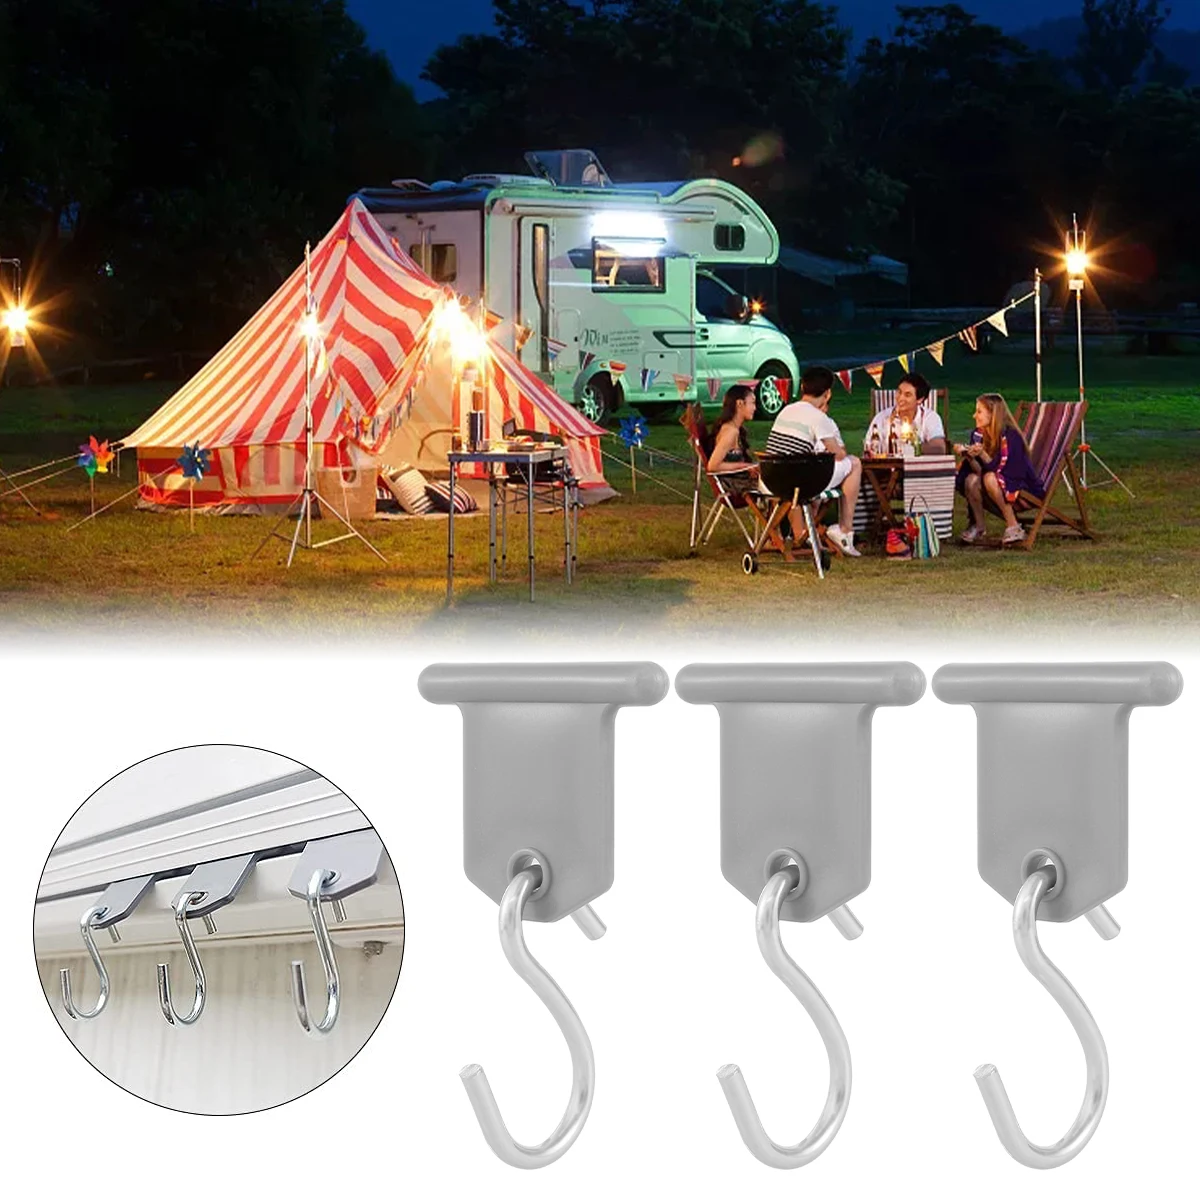 8X Universal White RV Awning Hook Hanging Clothes Party Light Holder For Caravan Camper Outdoor Camping survival Hiking Travel